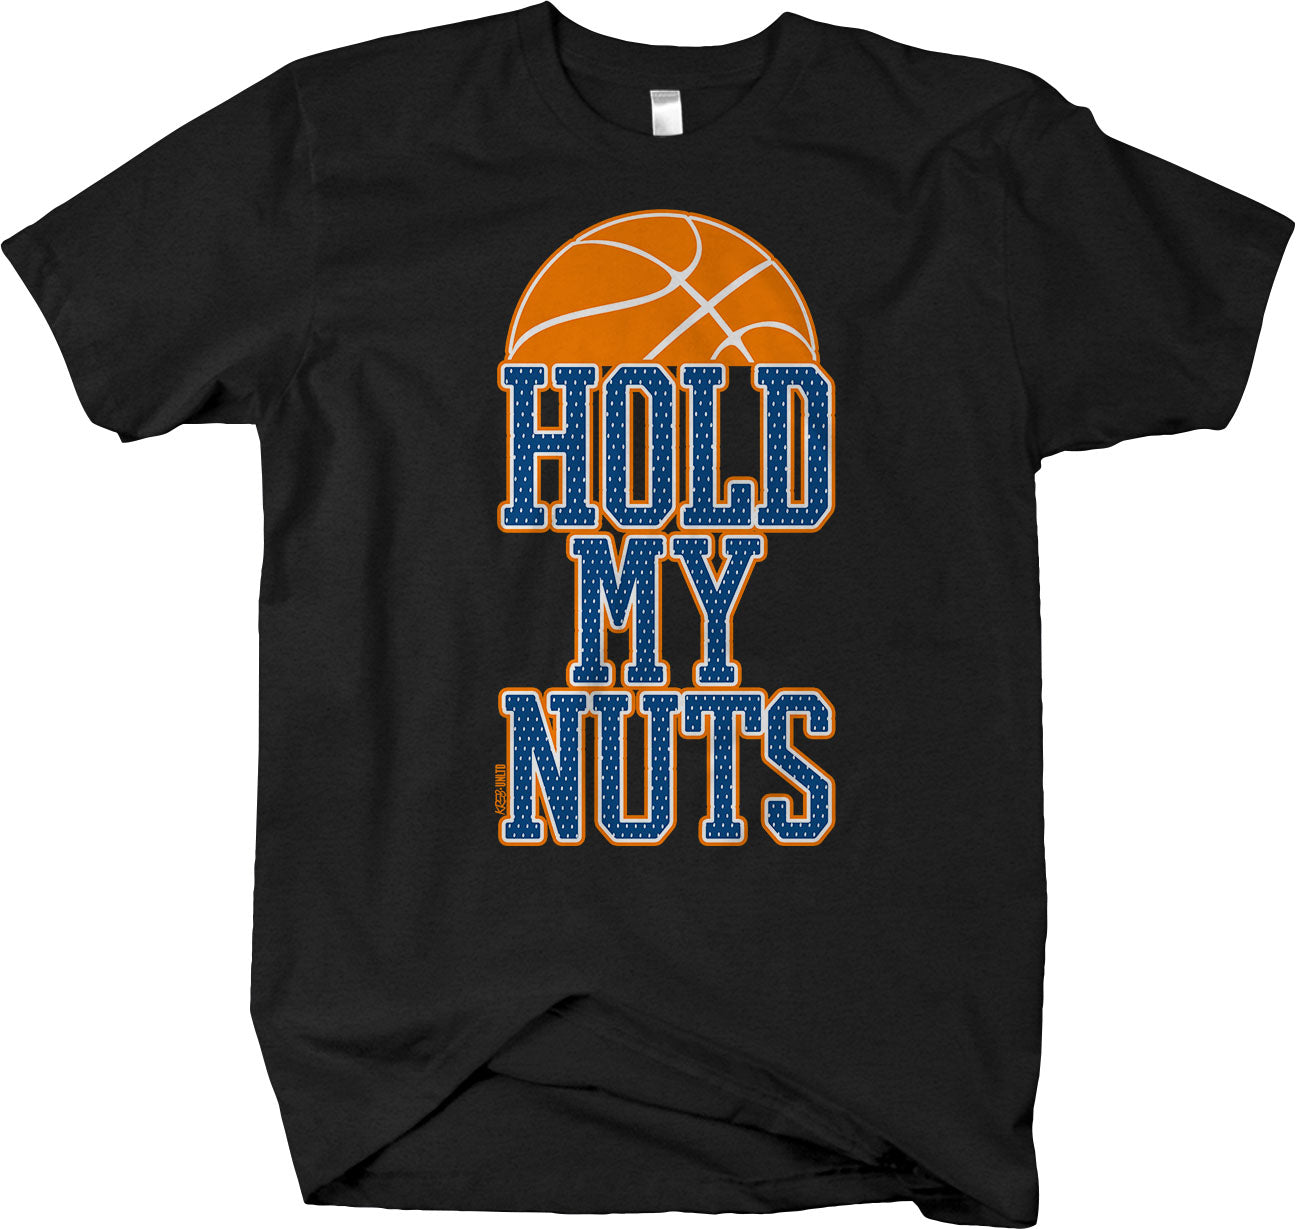 Hold My Nuts T-shirt - Inspired by The movie Uncle Drew